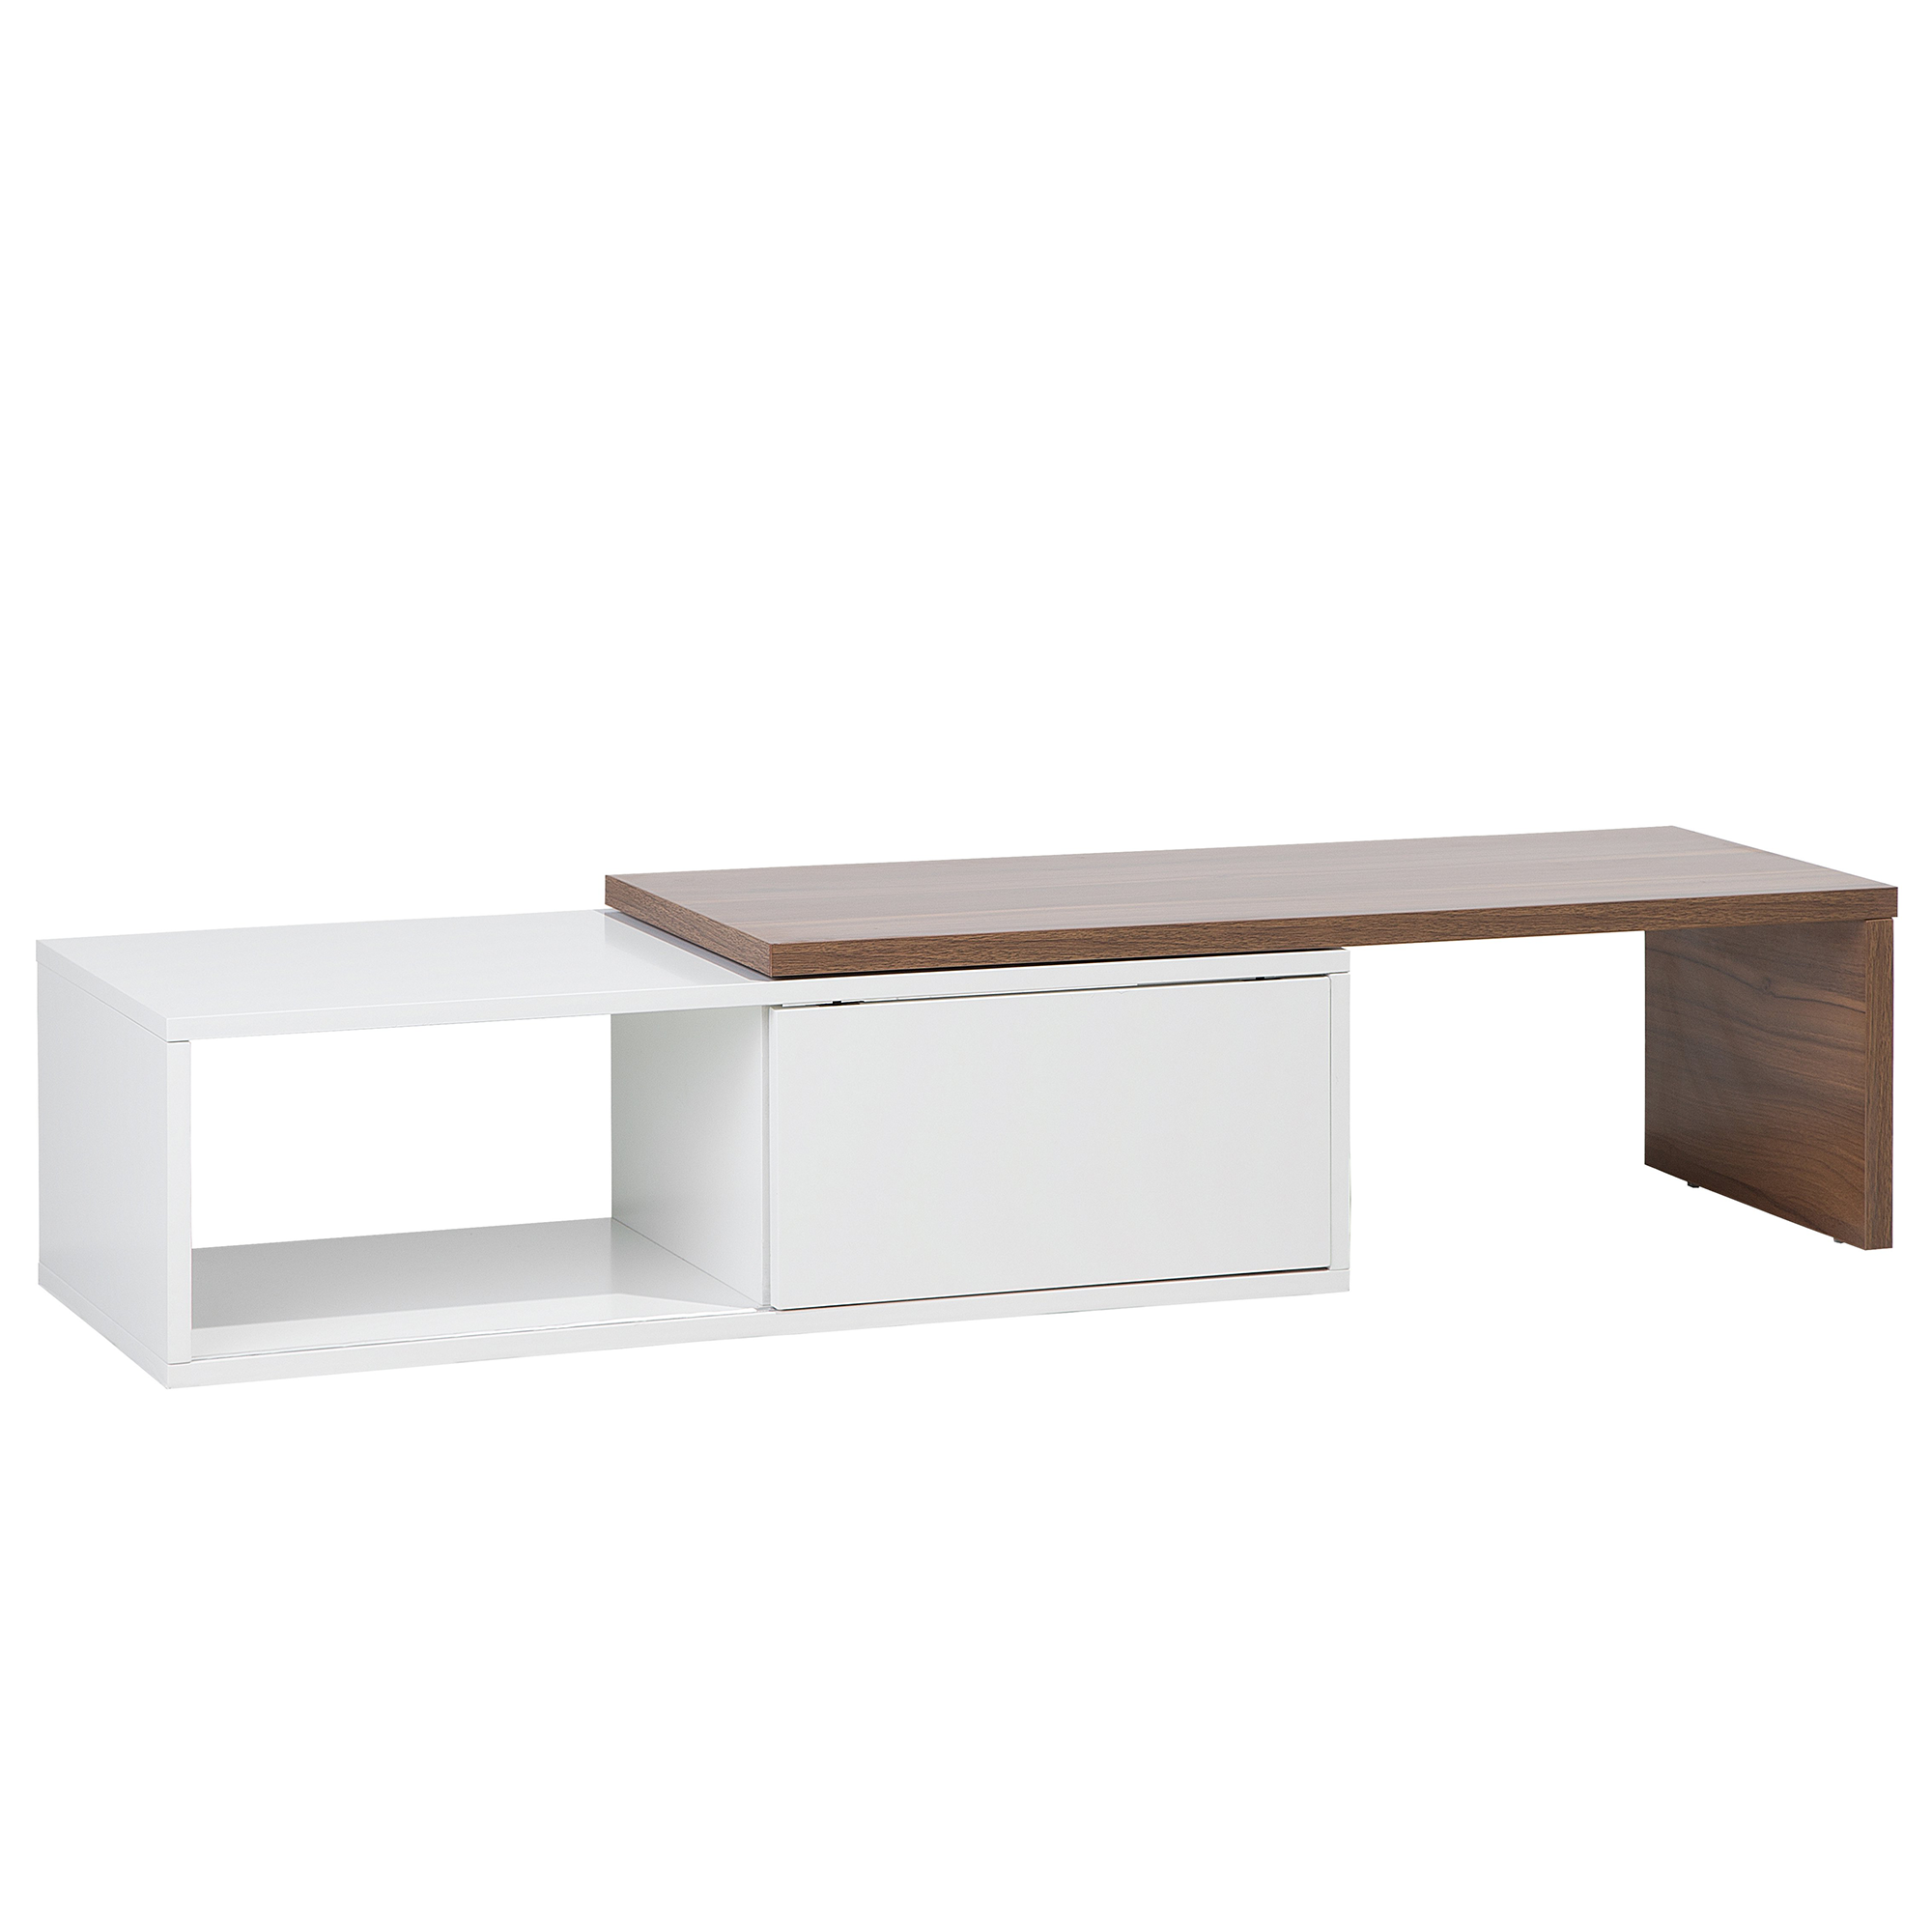 Beliani TV Stand Light Wood and White MDF for up to 70 ʺ Extending Top Media Unit Material:MDF Size:40x32x110-159